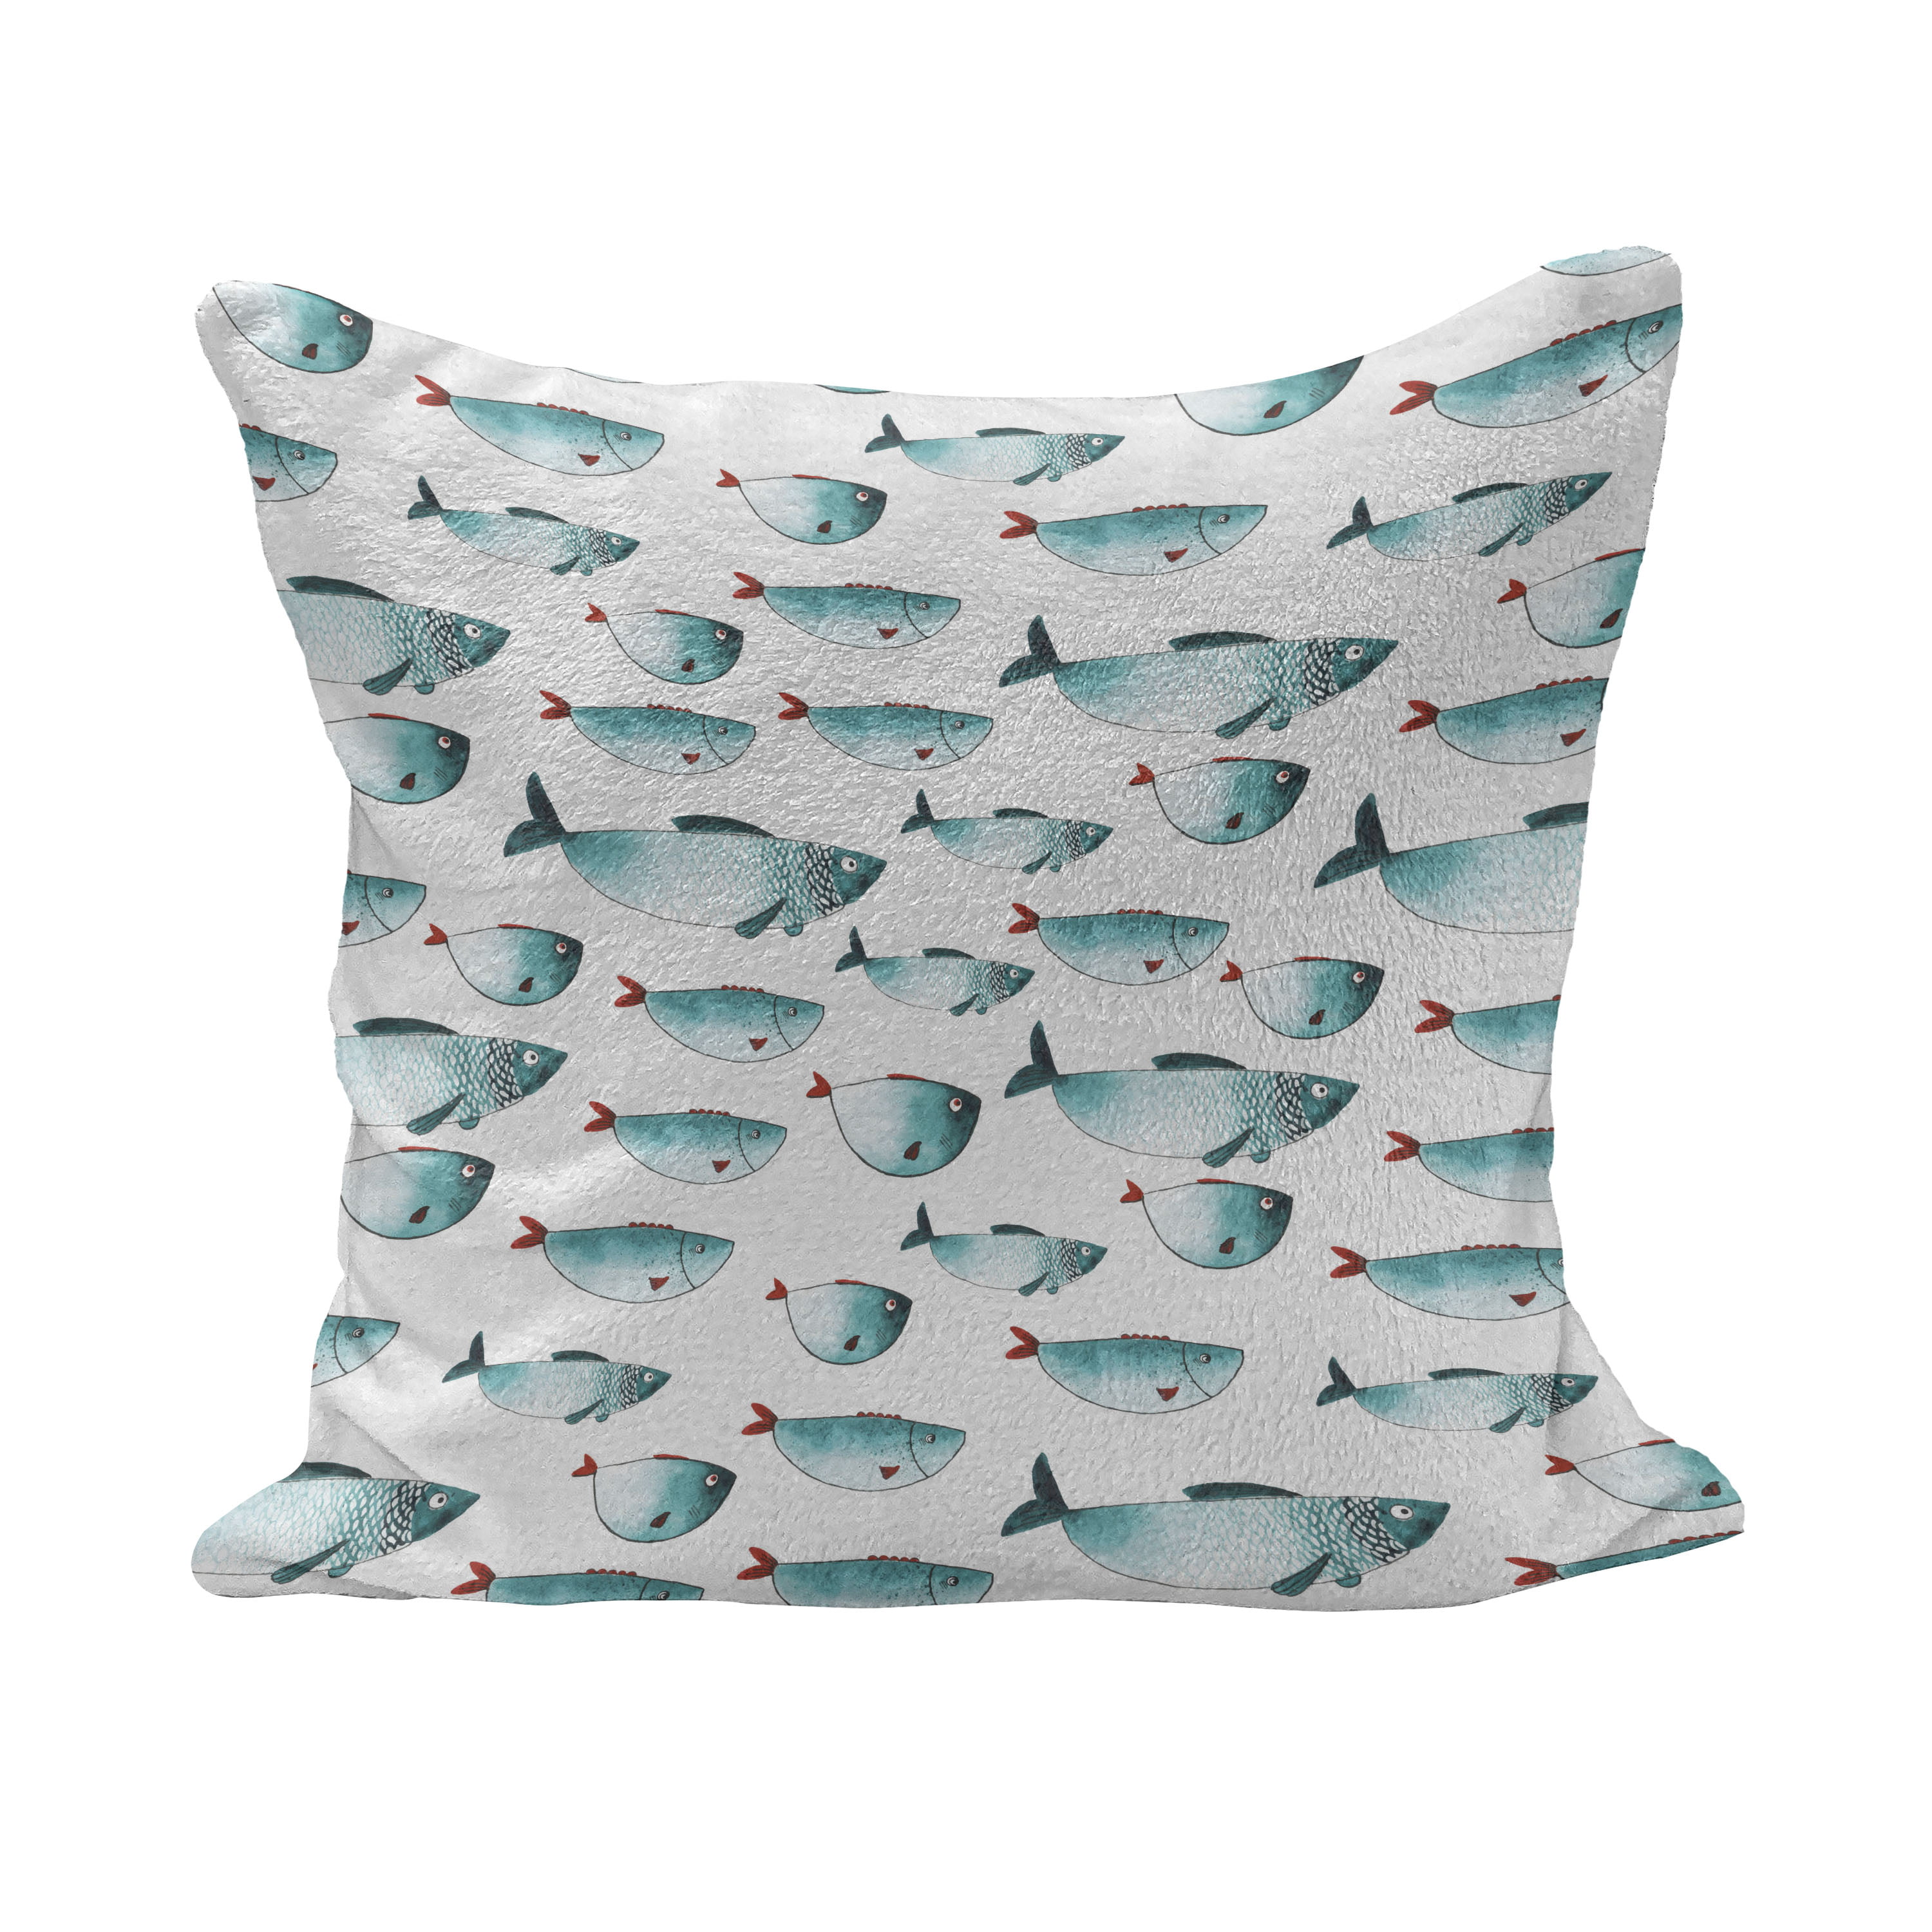 Animal Cute Designs Just A Boy Who Loves Koi Fish Throw Pillow 16x16 Multicolor